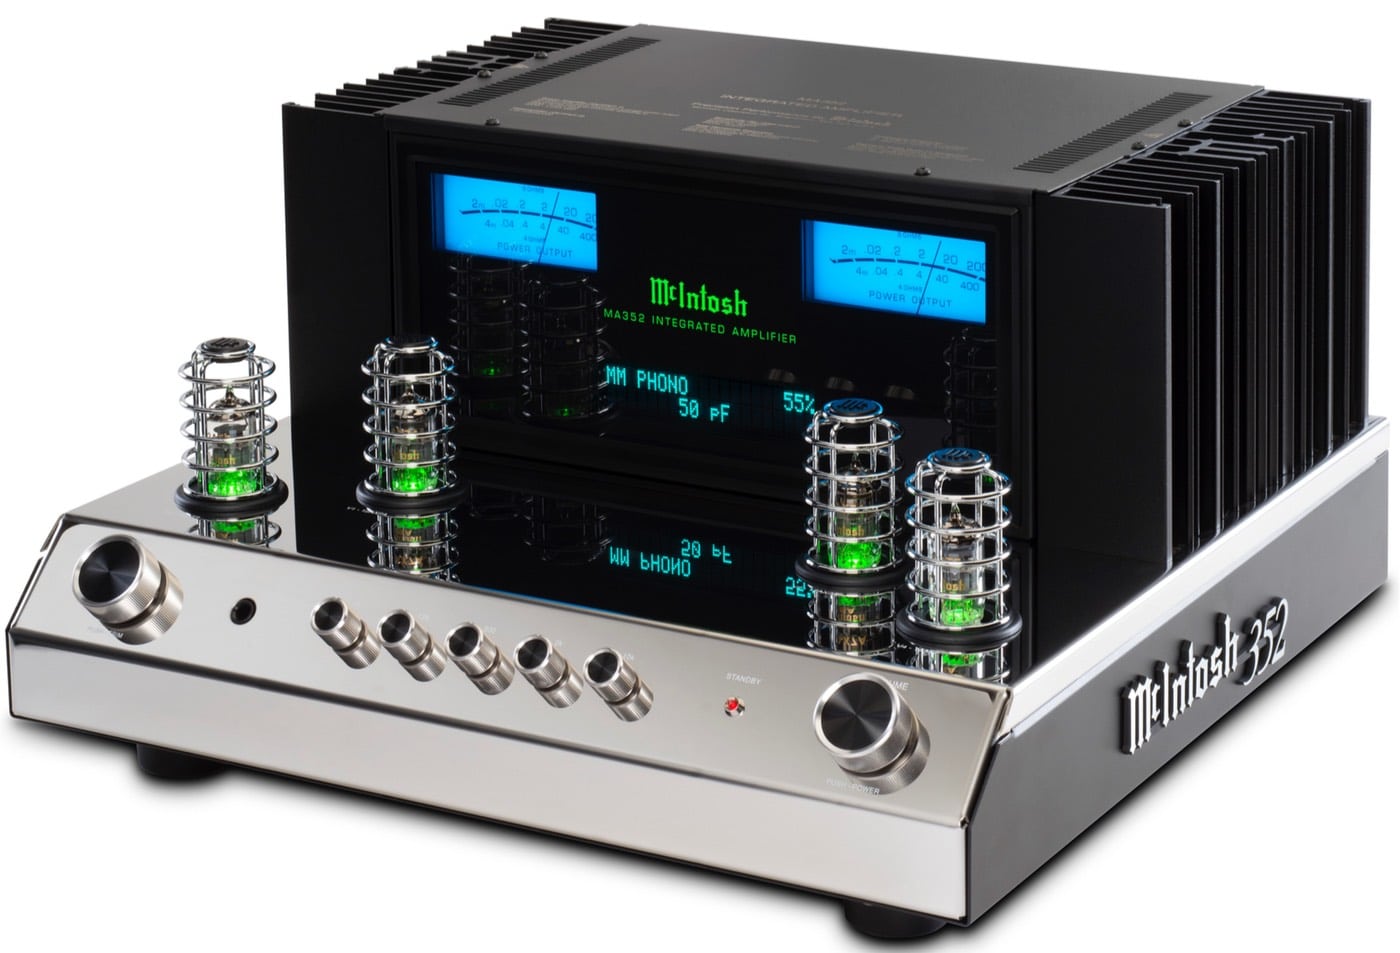 MA352 Amplifier From McIntosh